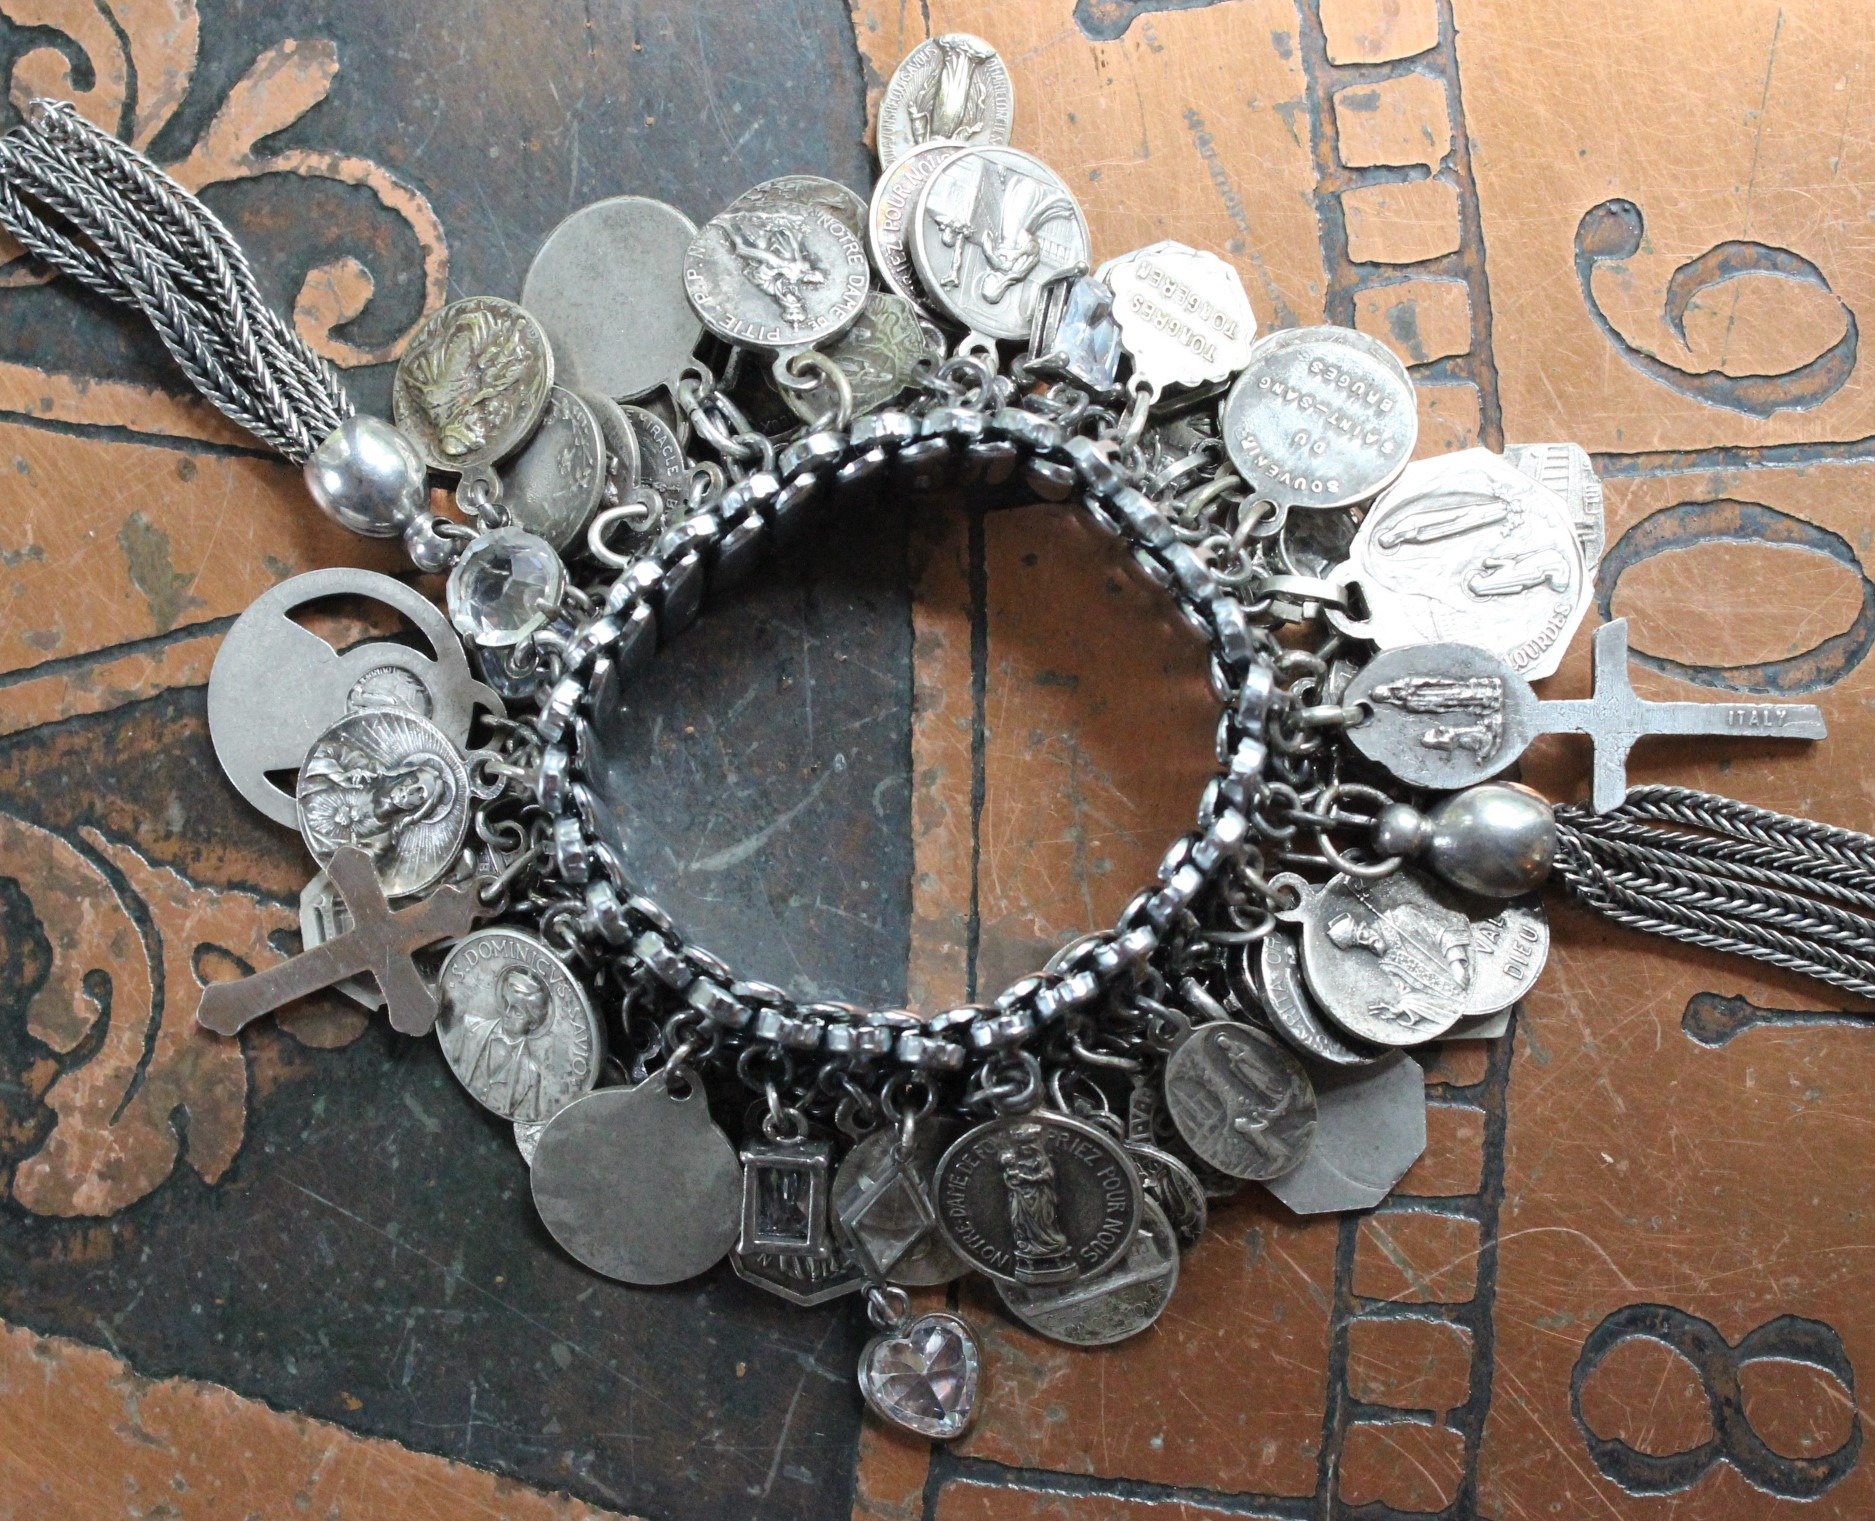 OOAK Antique French Medals Expanding Fully Loaded Charm Bracelet with over 72 Antique Medals, Crosses, Crystals, & Drops!!